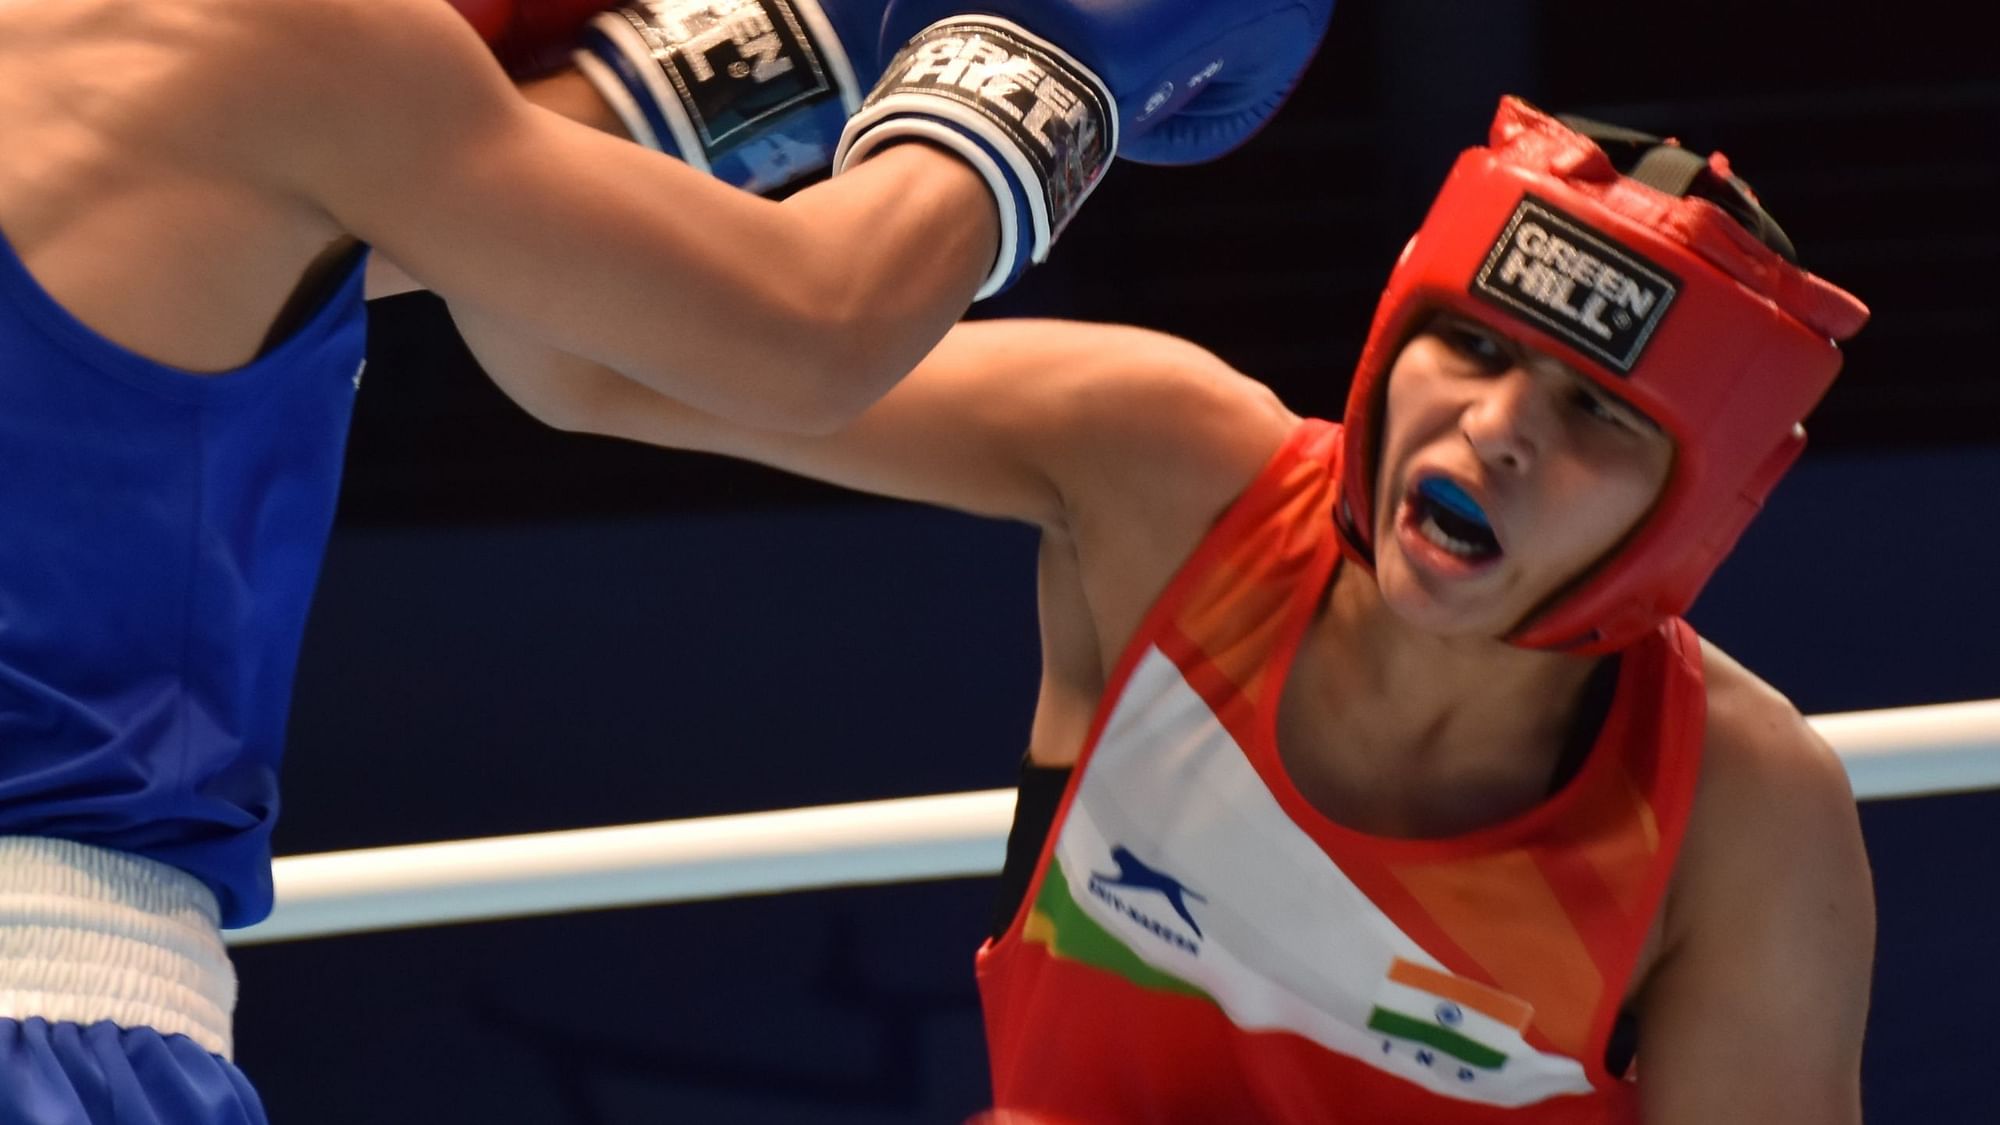 Debutant Manju Rani (48kg) will be vying for her maiden gold medal at the World Women’s Boxing Championships today.